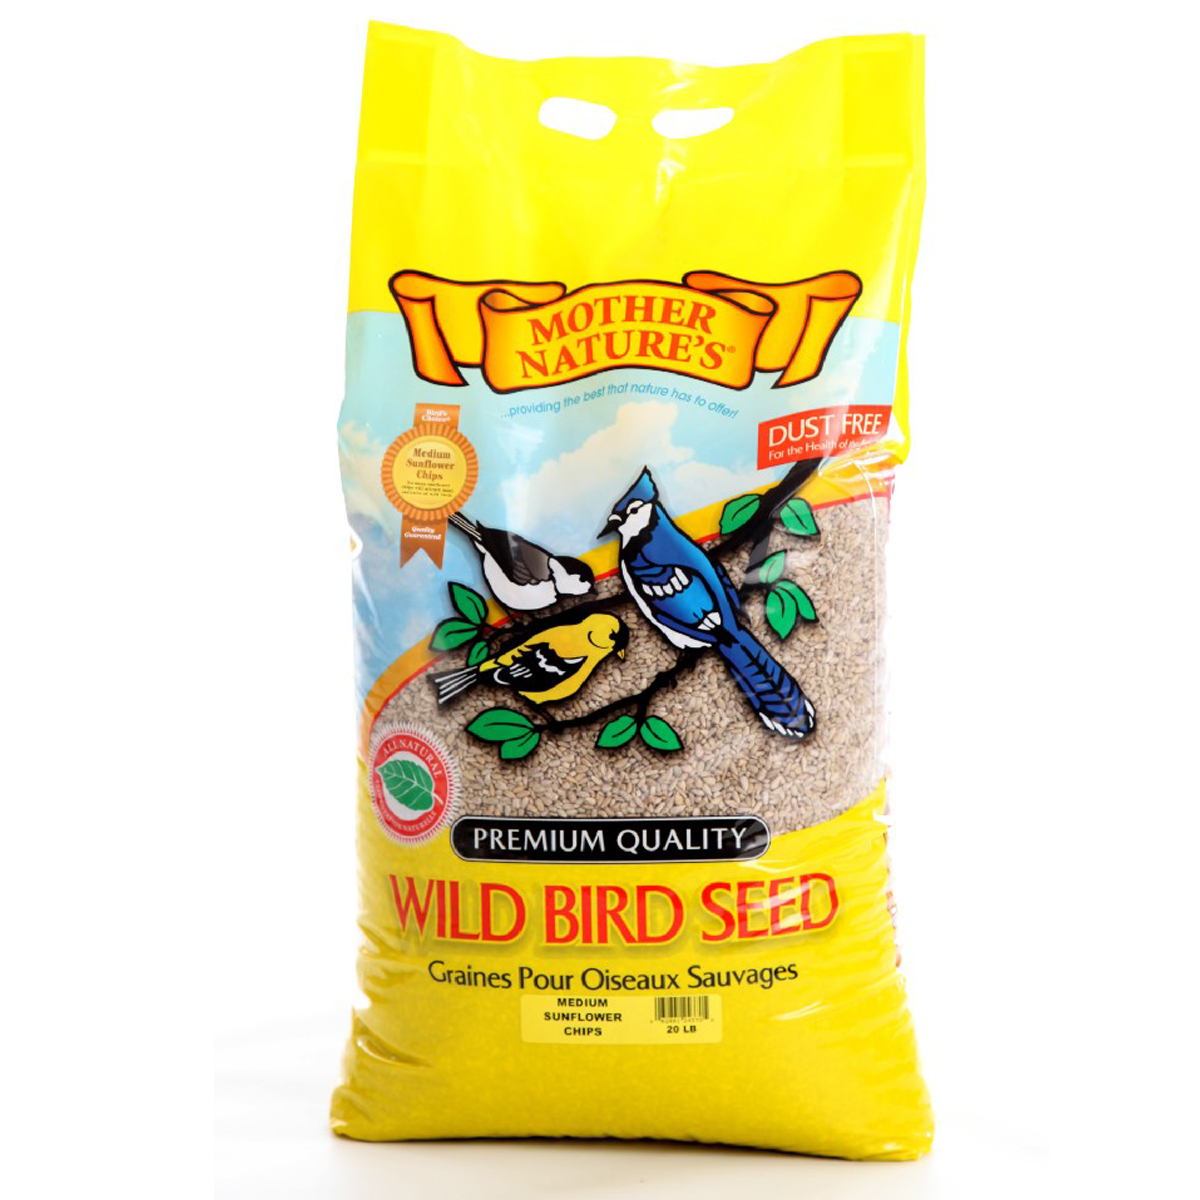 Mother Nature's Sunflower Chips - 2.5 kg